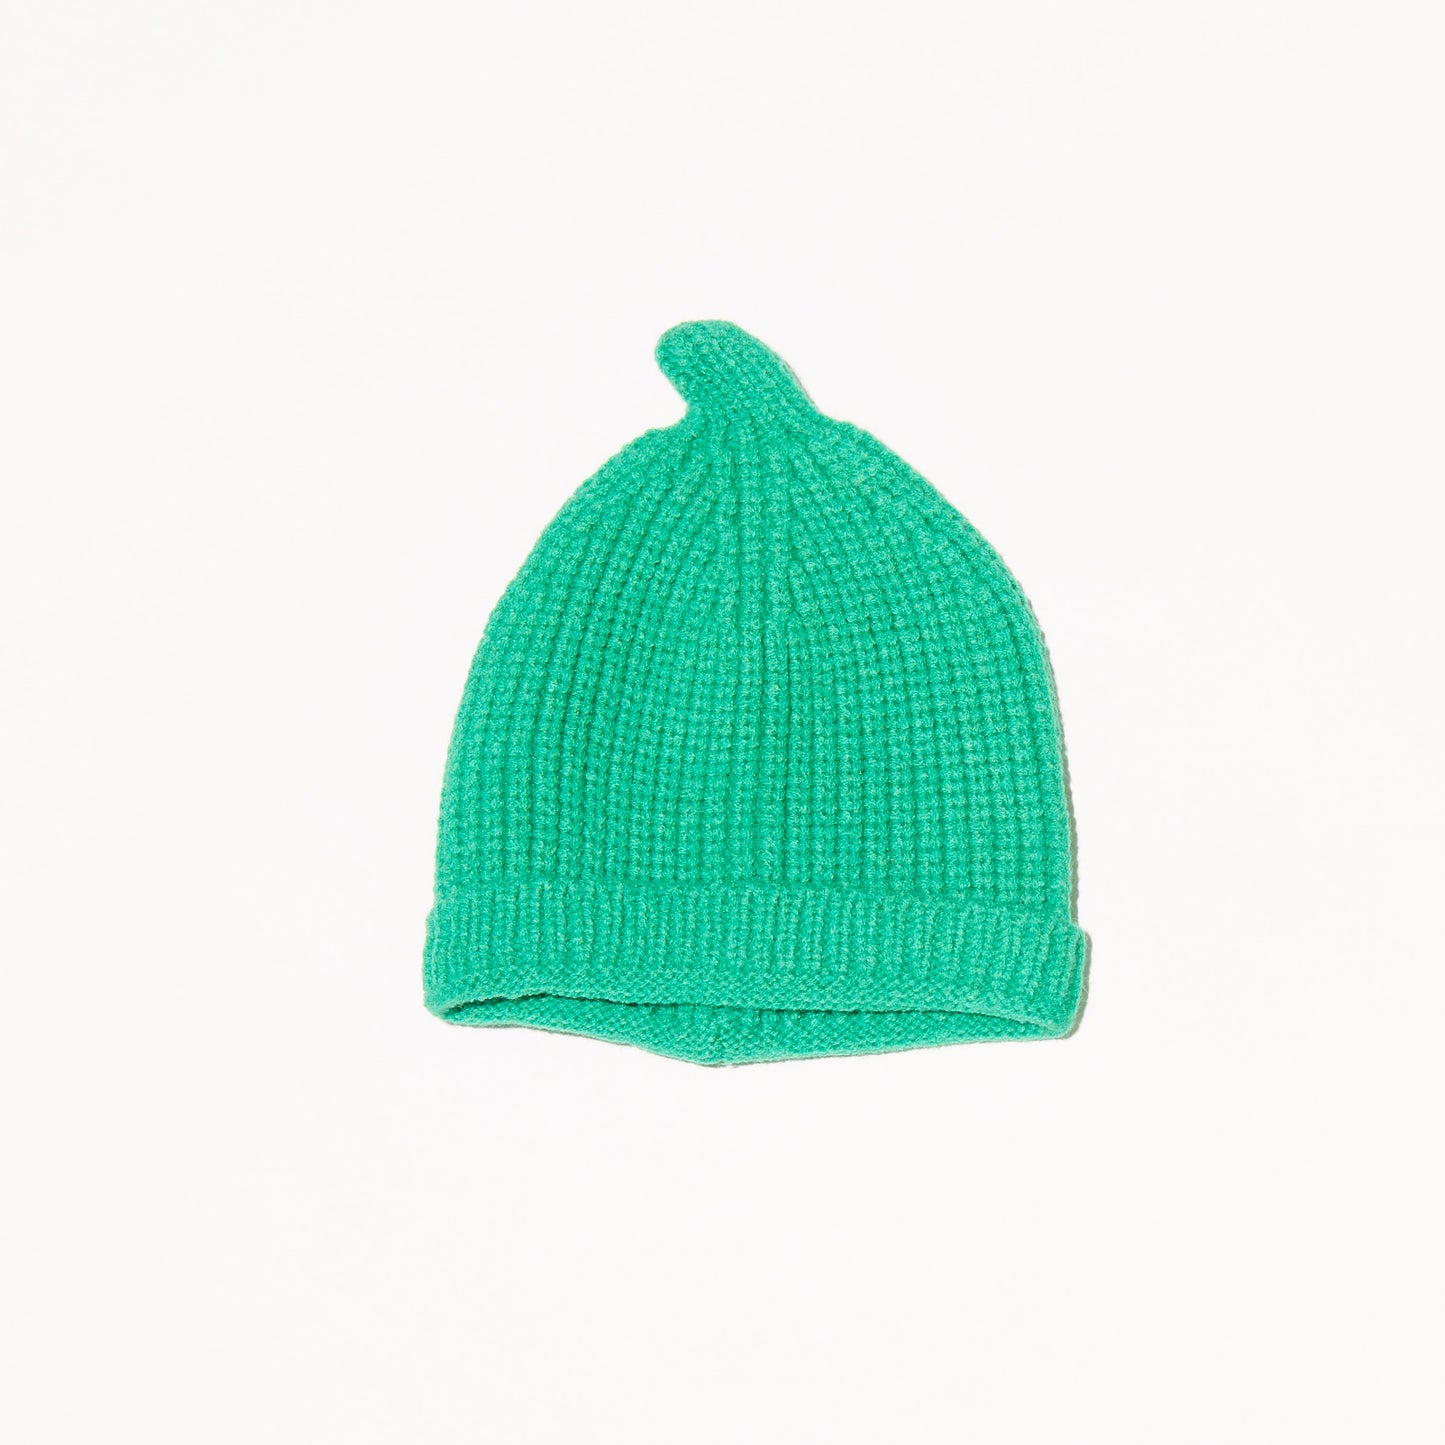 Toto Infant Beanie - One Size